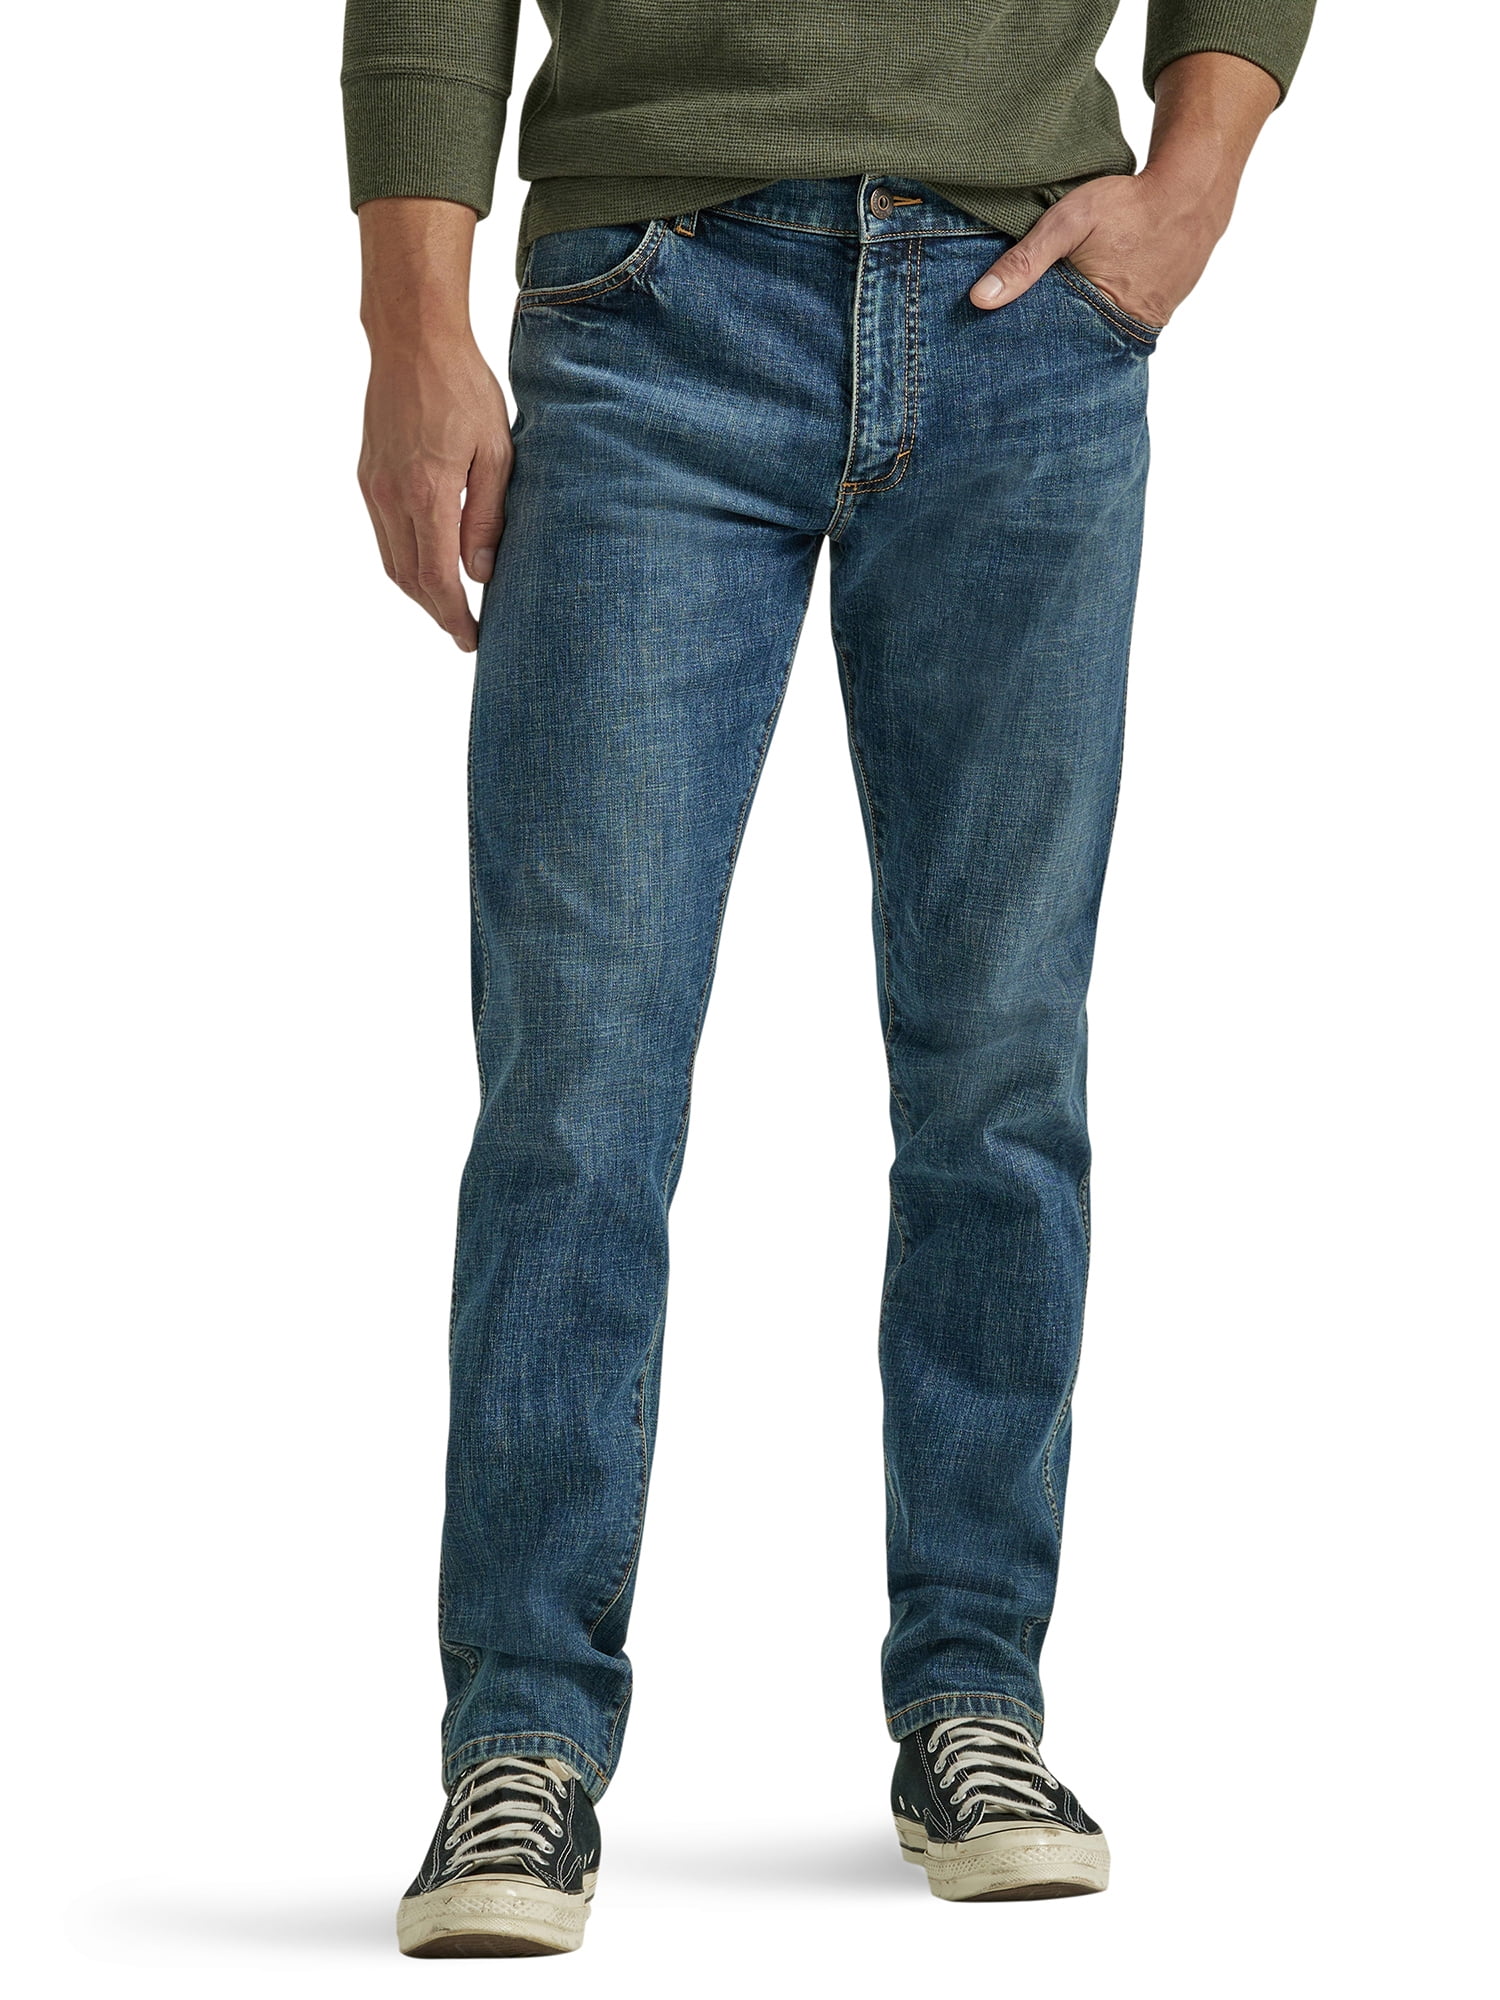 Wrangler® Men's 5-Pocket Tapered Fit Jean with Stretch, Sizes 30-42 ...